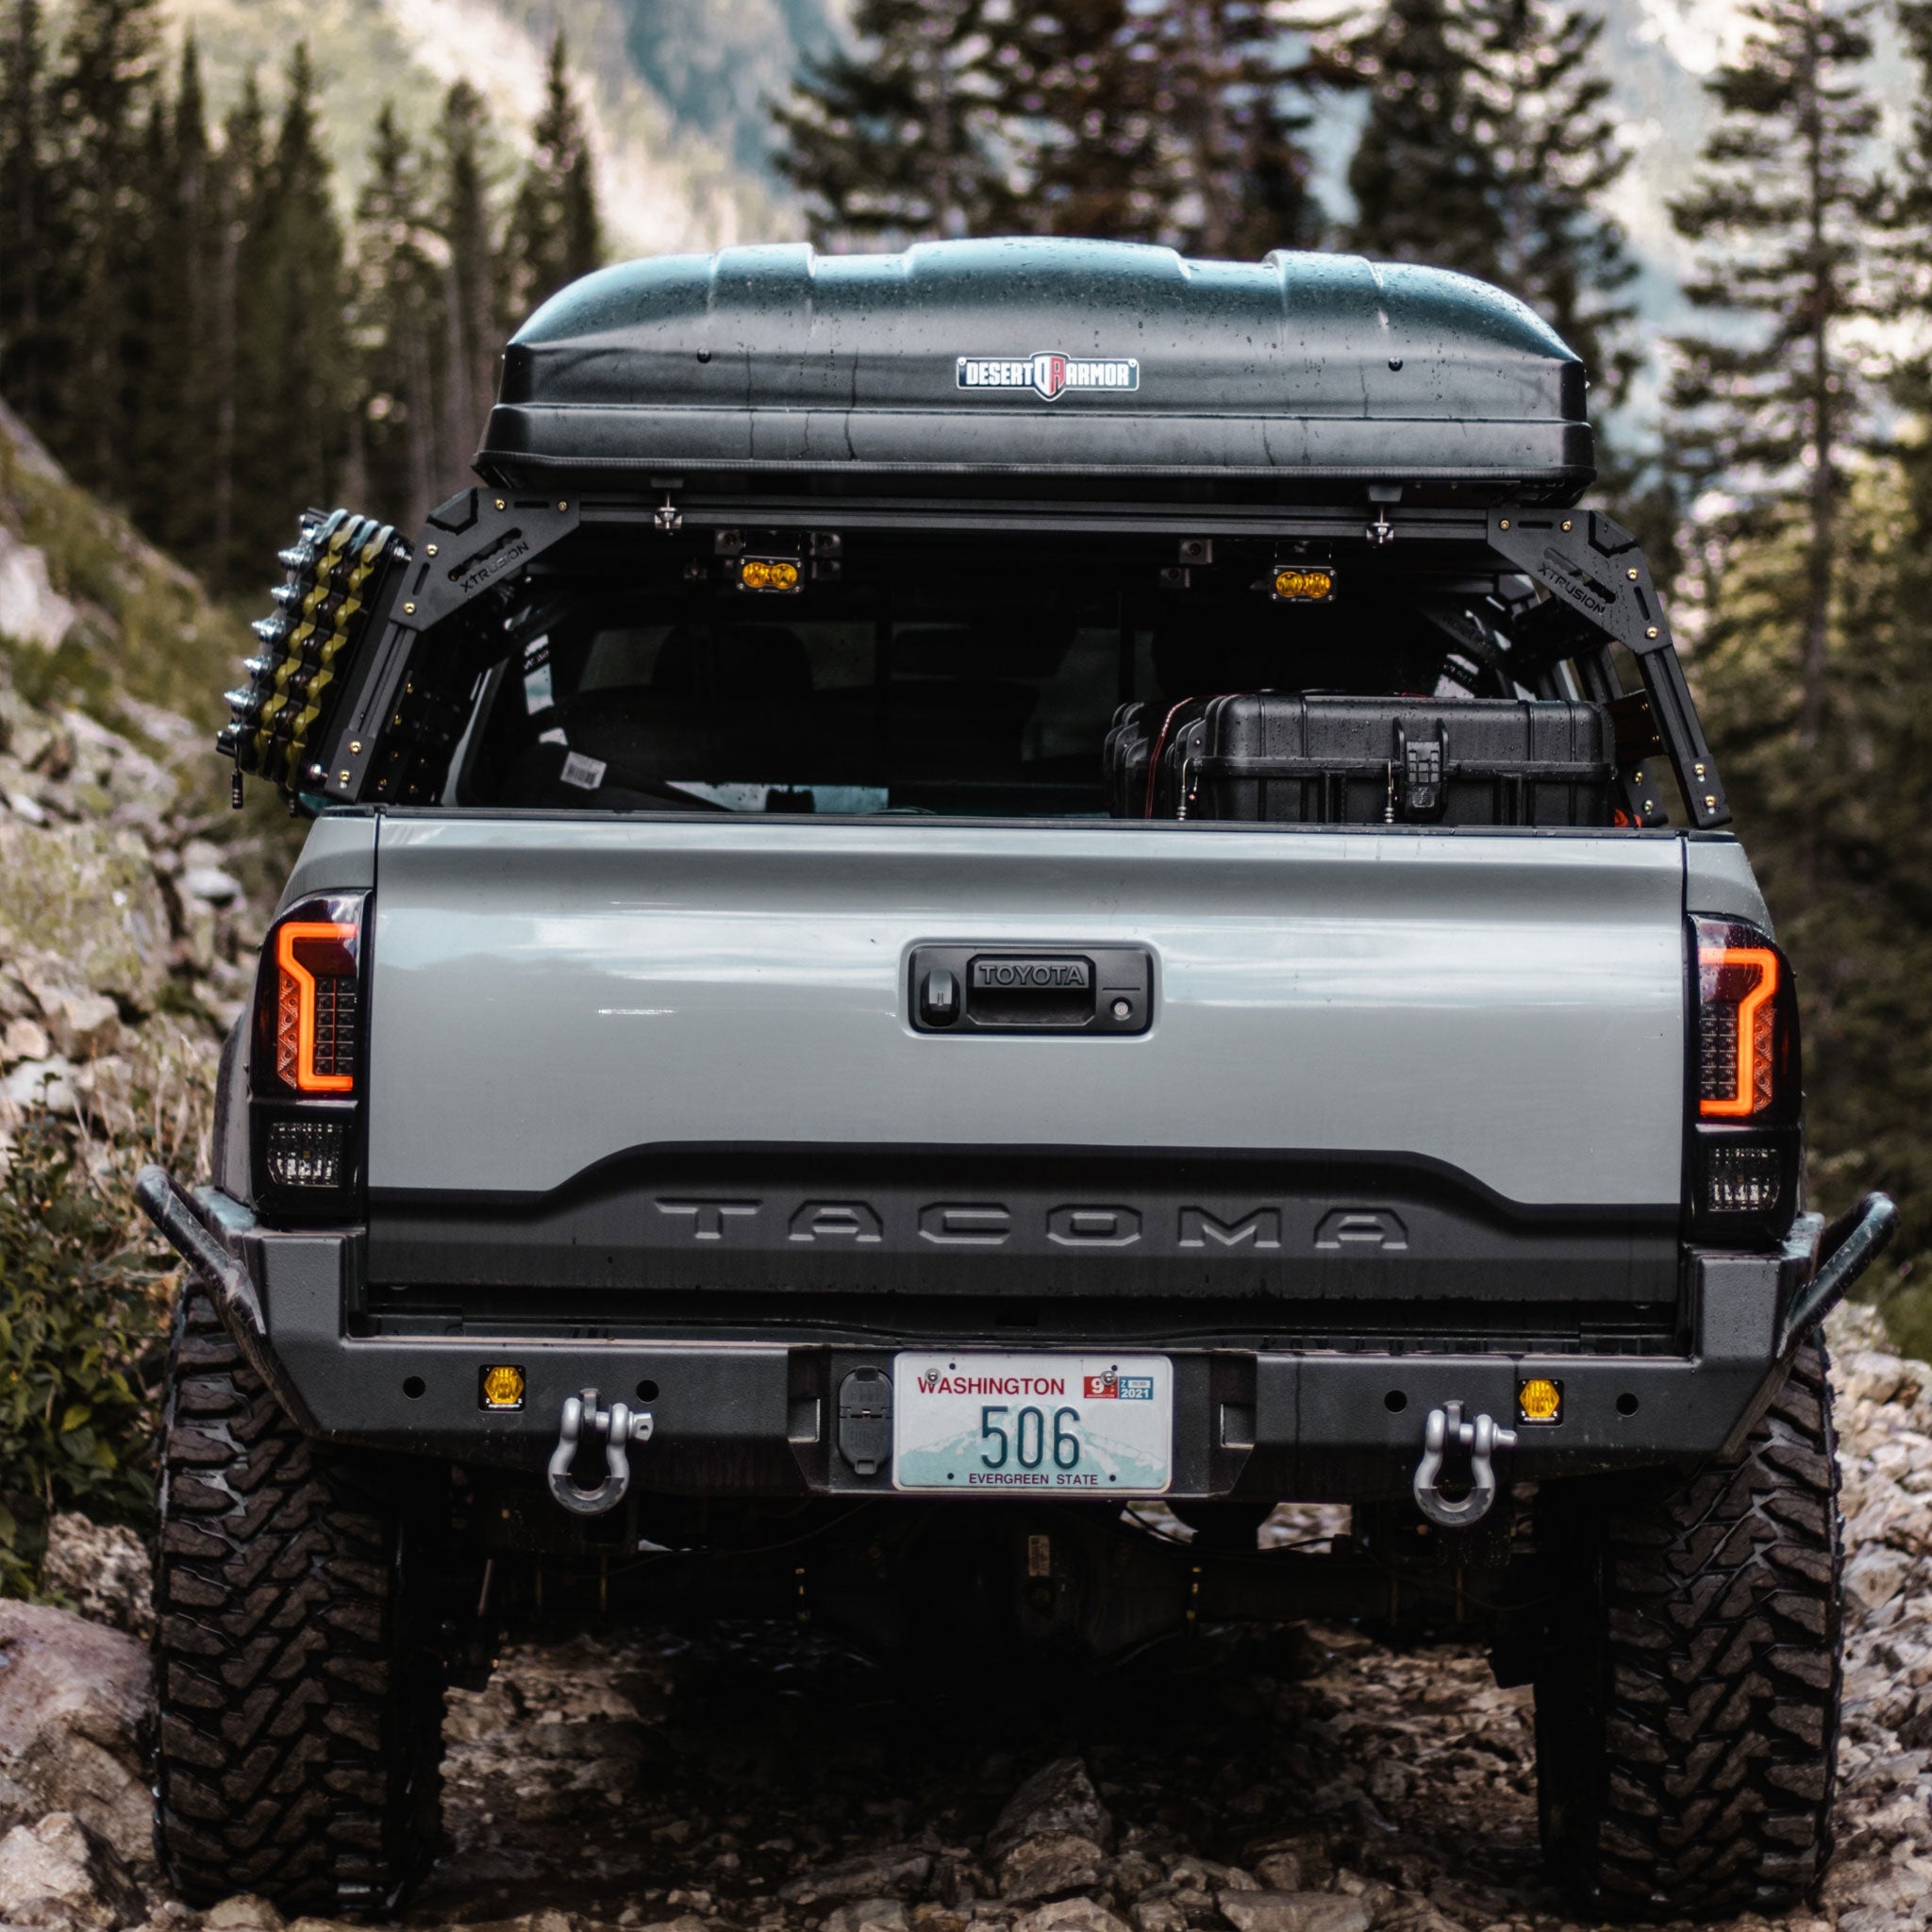 Toyota Tacoma and XTR1 overlanding bed rack 